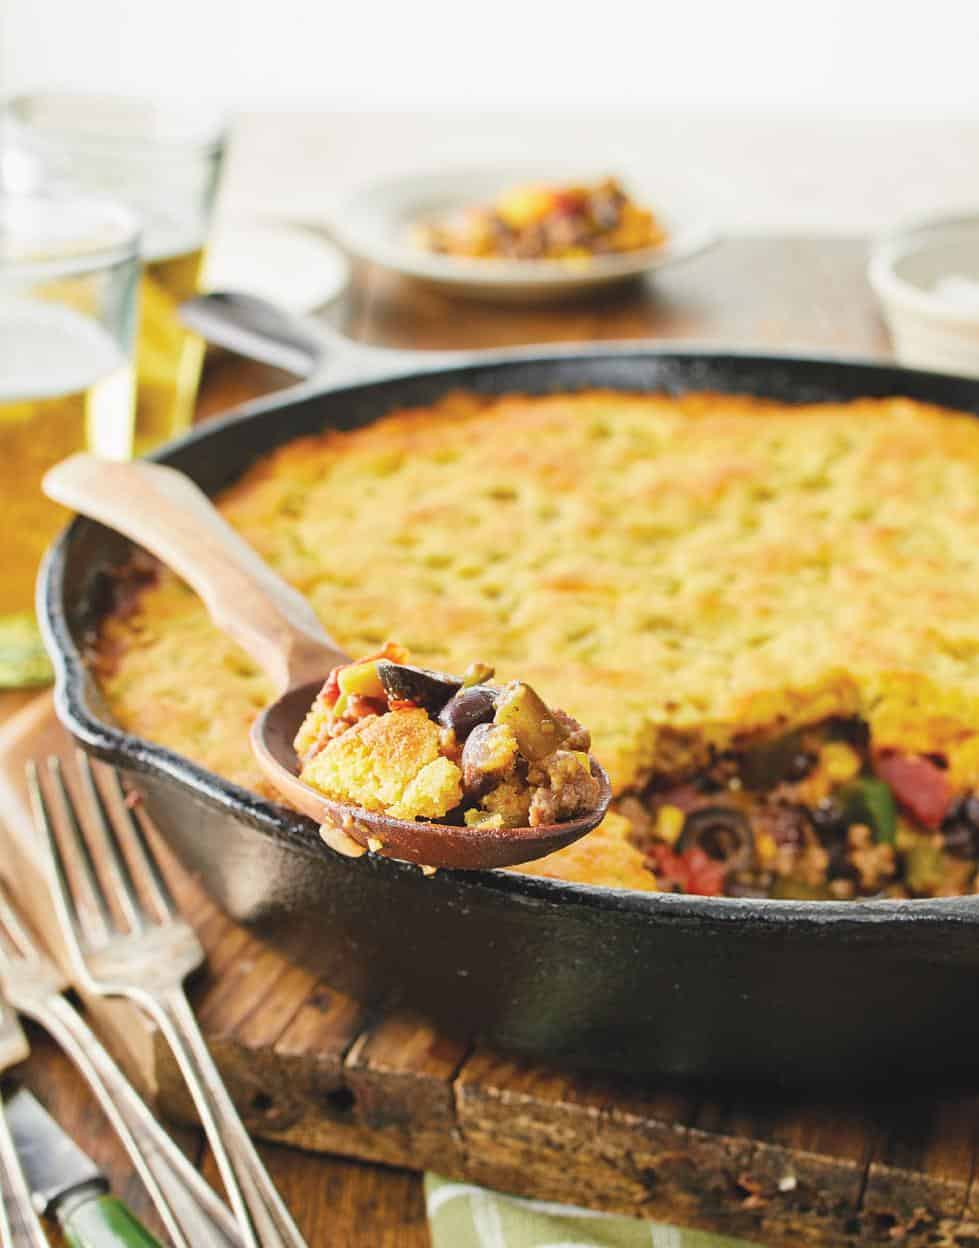  Nothing beats a hot slice of Corn Bread Tamale Pie on a chilly evening.